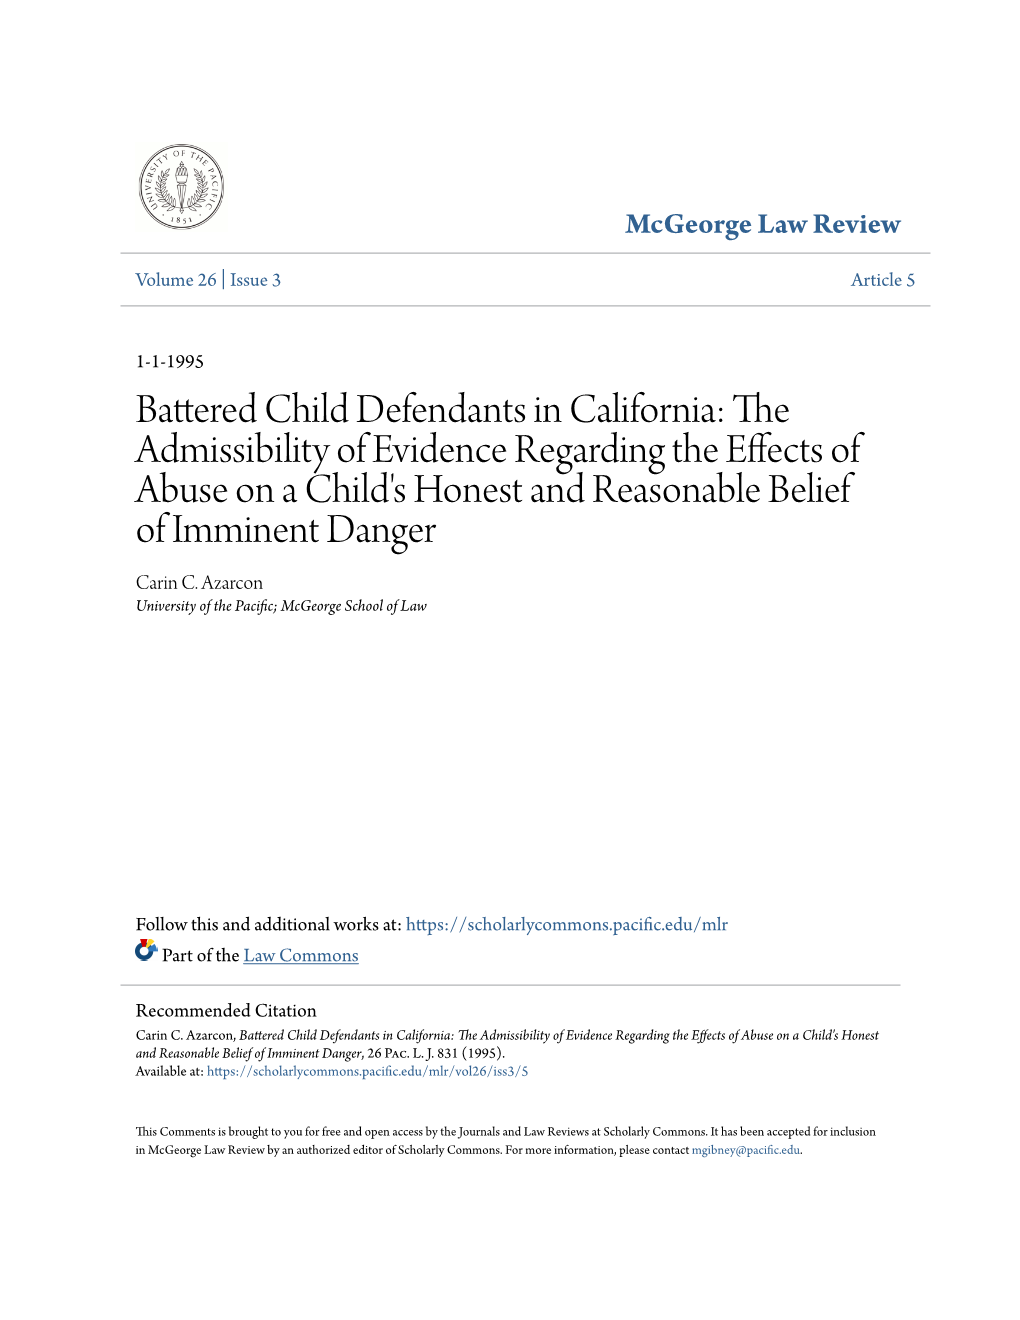 Battered Child Defendants in California: the Admissibility Of